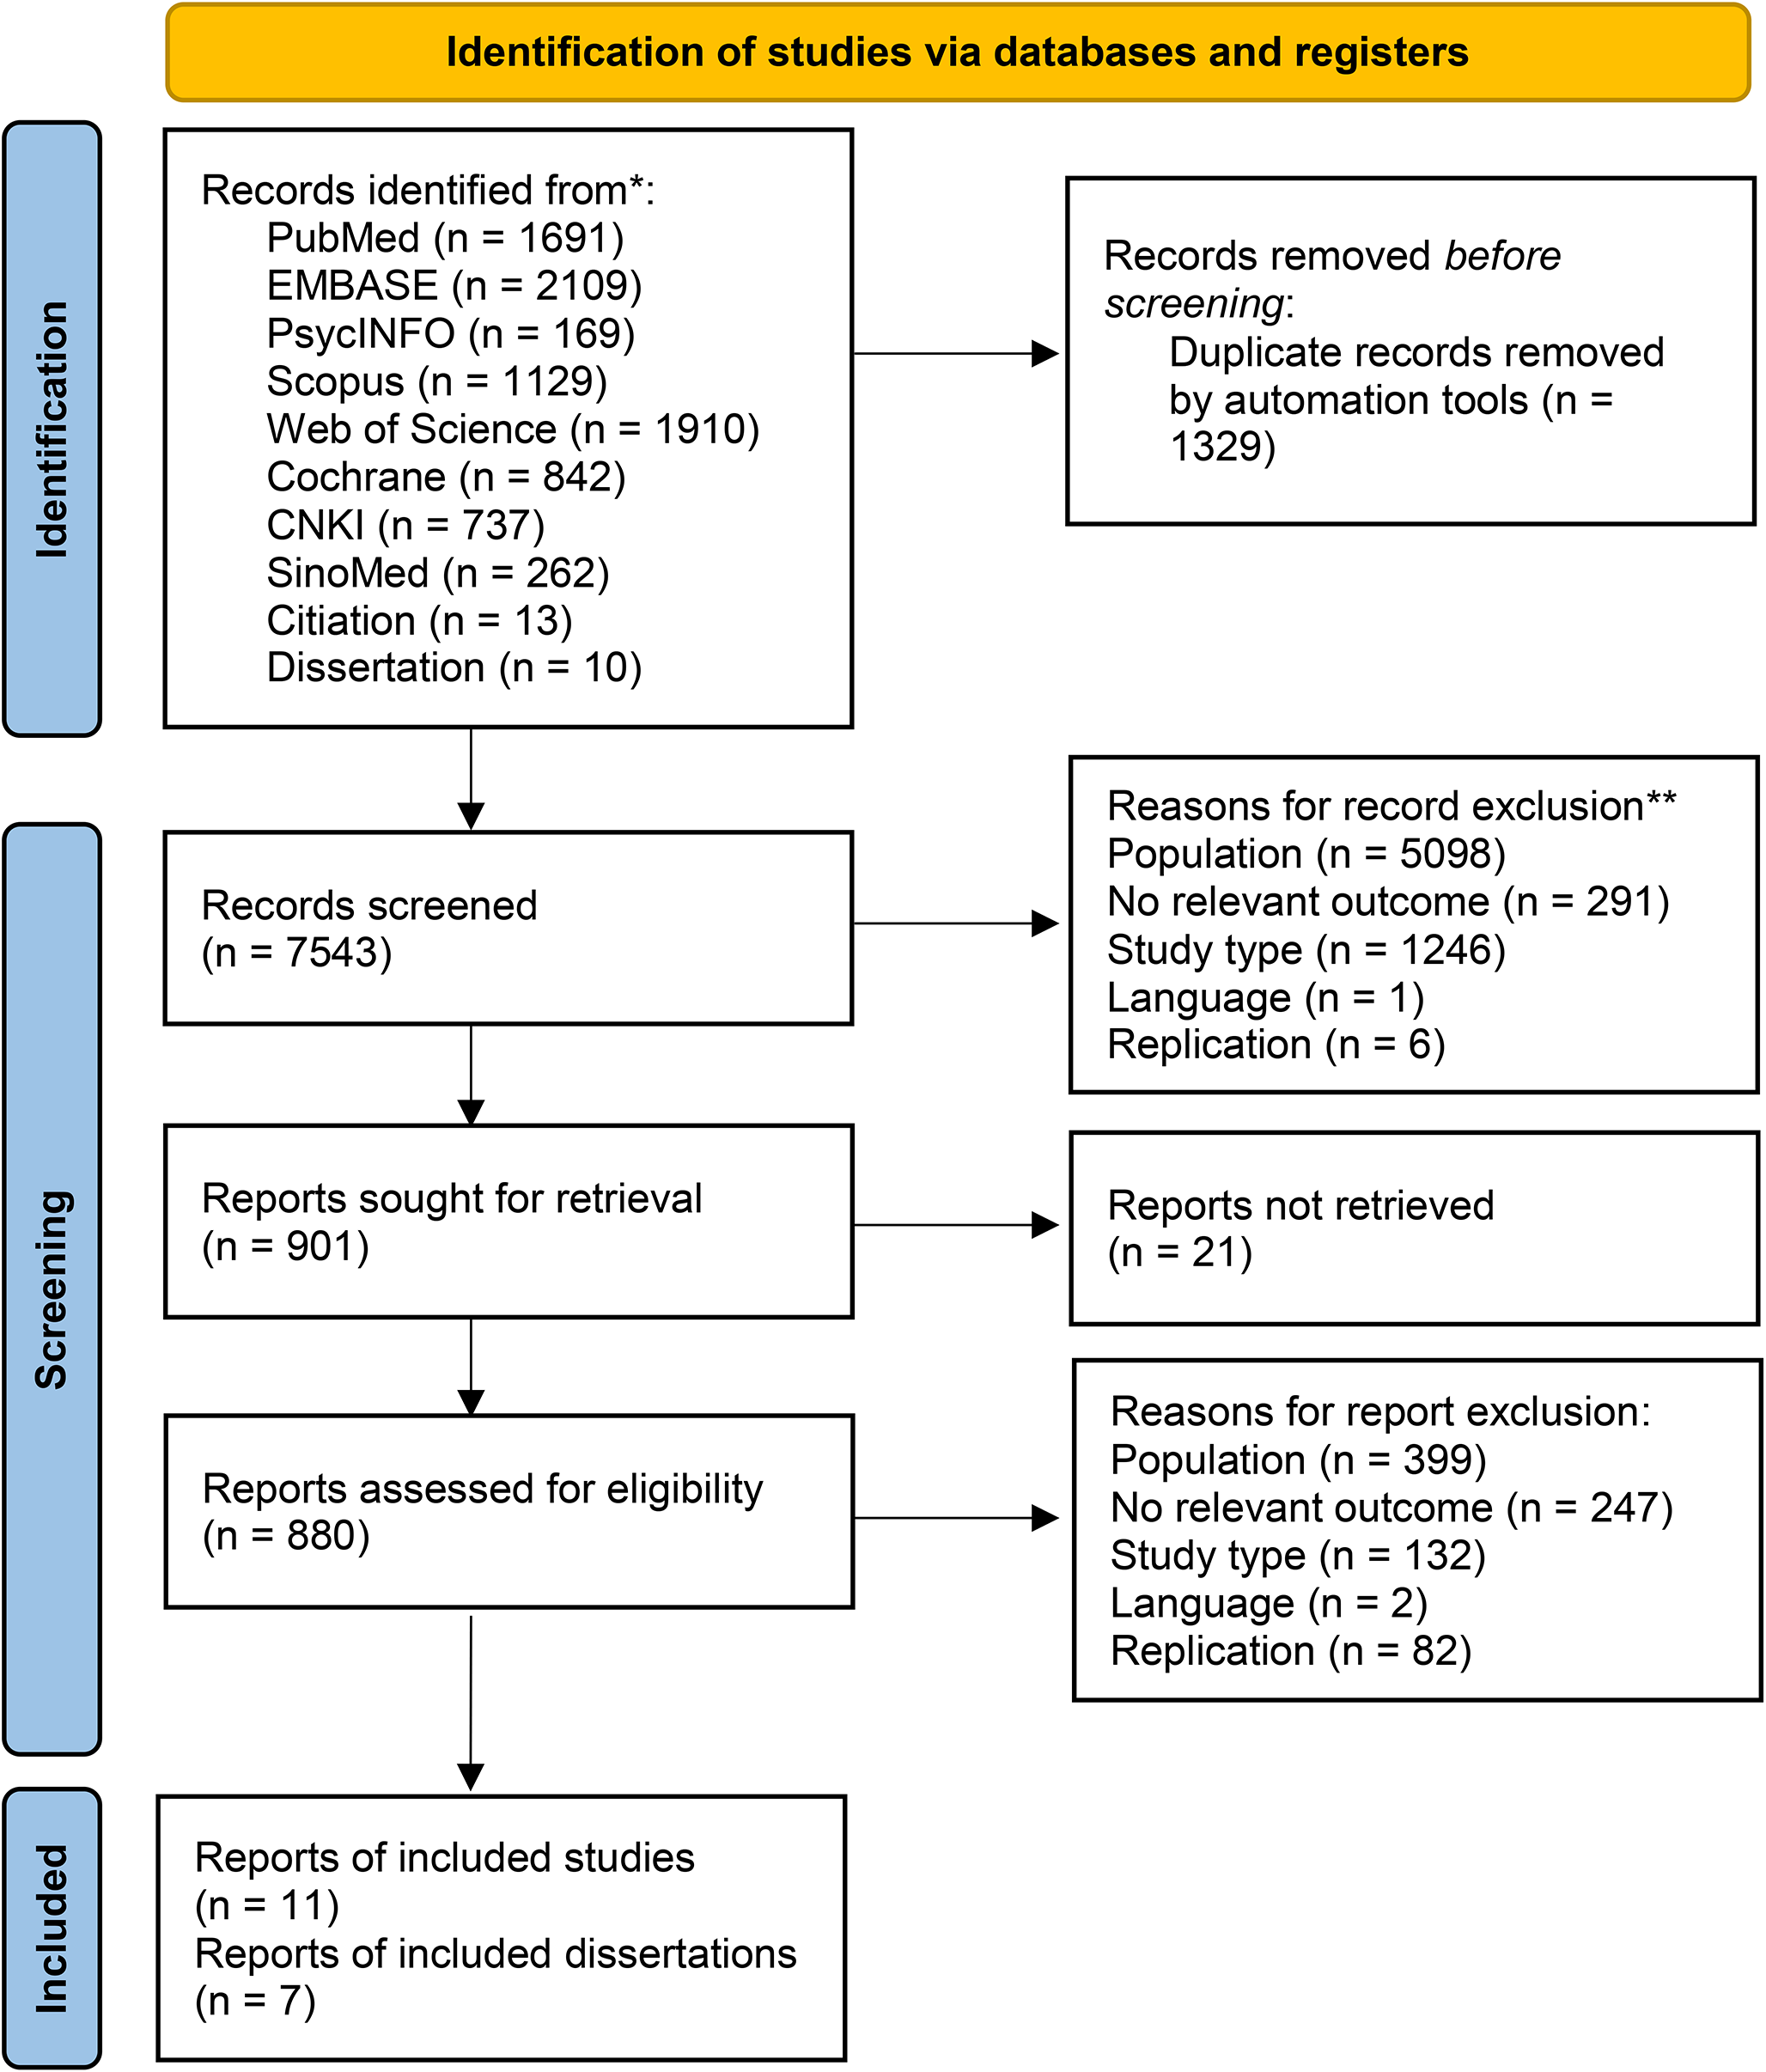 Association between obstructive sleep apnea severity and depression risk: a systematic review and dose-response meta-analysis